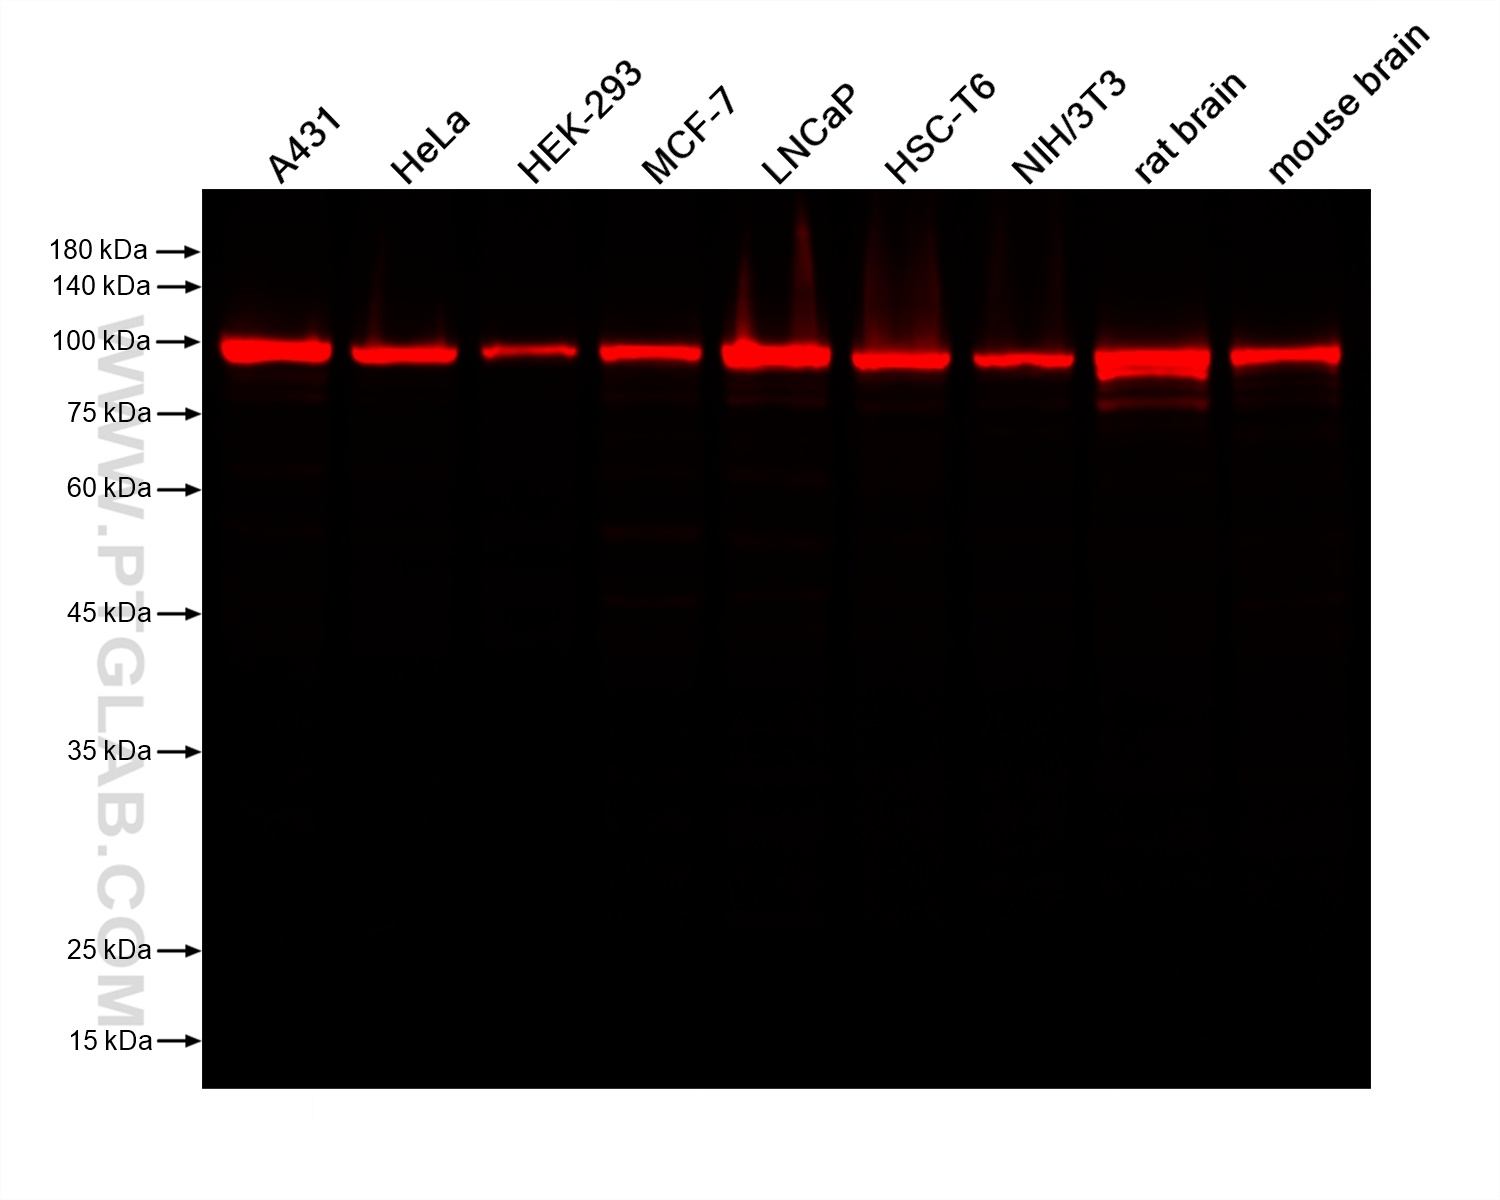 Various lysates were subjected to SDS-PAGE followed by western blot with Rabbit anti-Beta Catenin recombinant antibody (Cat.NO. 80488-1-RR) at dilution of 1:40000. Multi-rAb CoraLite® Plus 750-Goat Anti-Rabbit Recombinant Secondary Antibody (H+L) RGAR006 was used at 1:10000 for detection. 